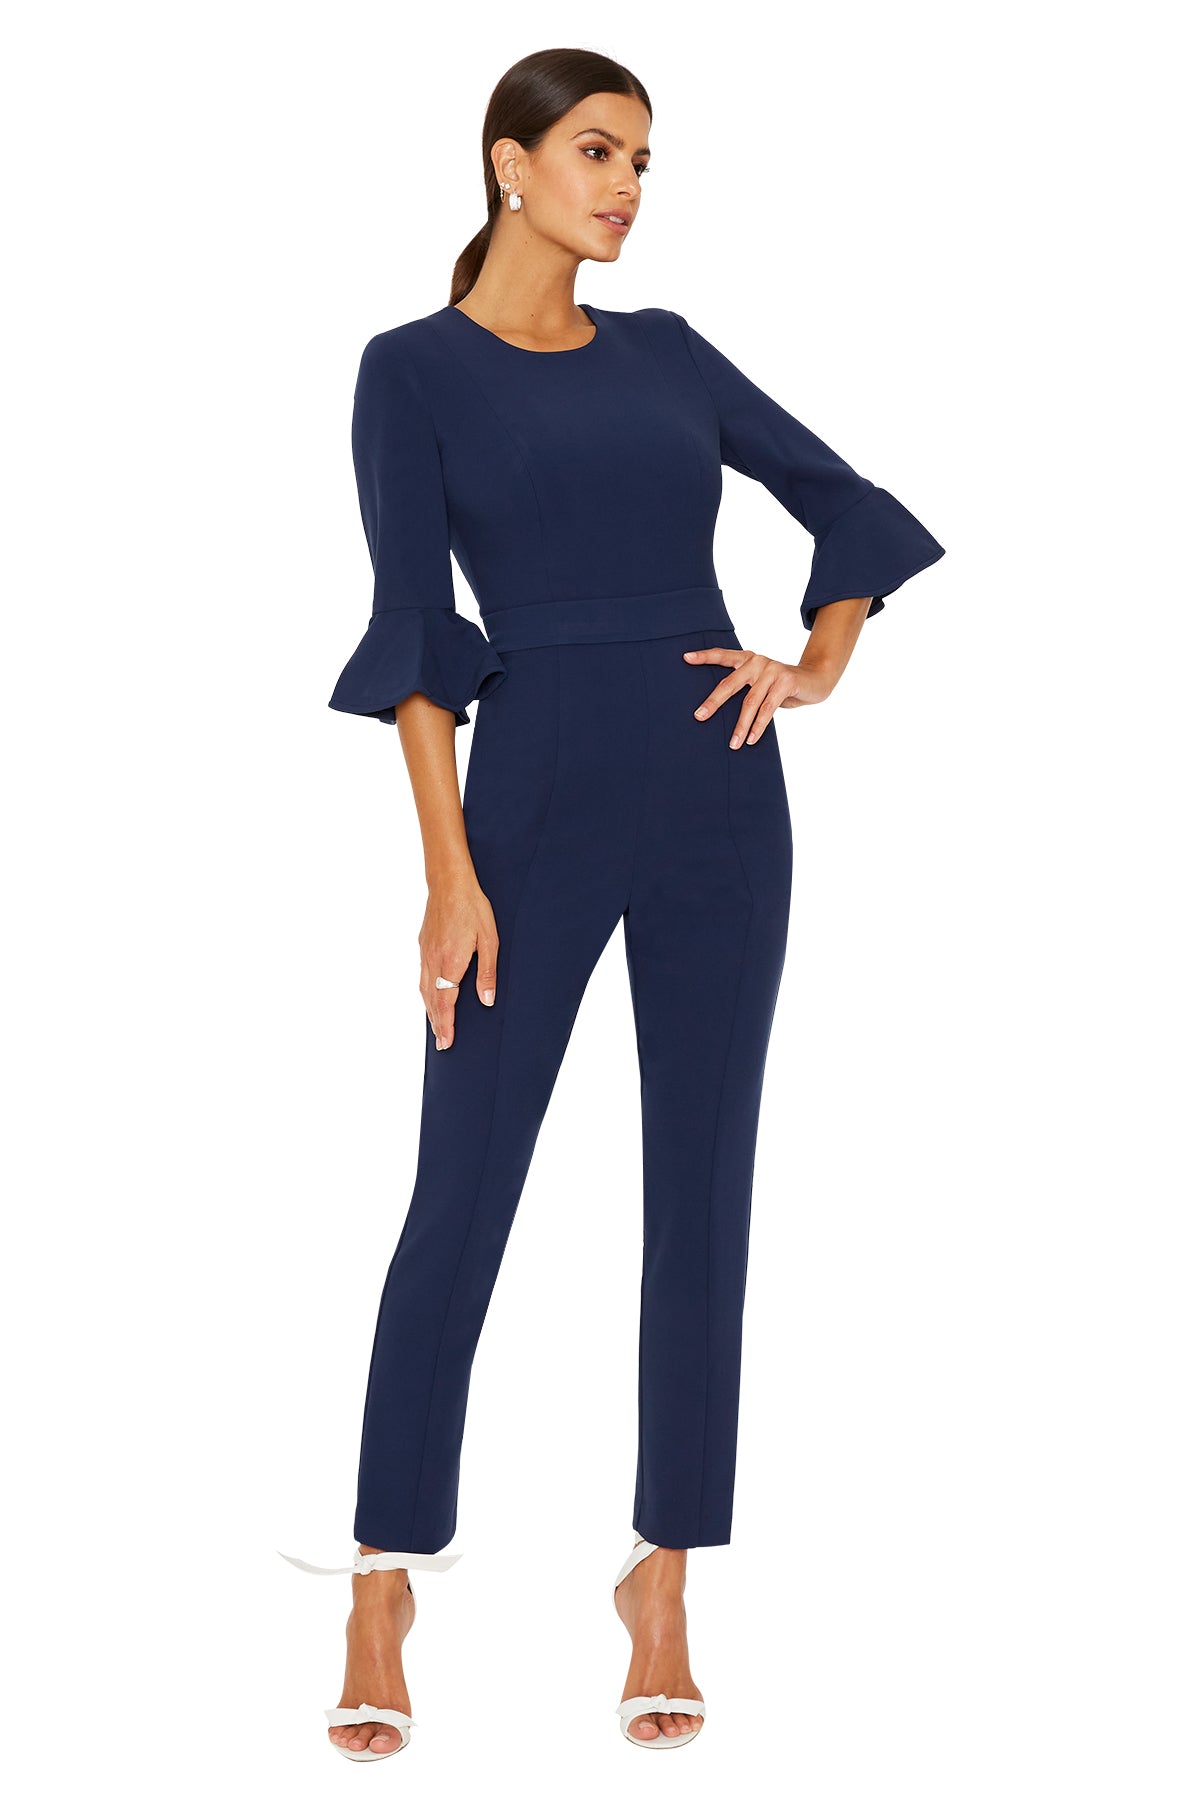 Buy Magnetic Designs Blue Frill Sleeve Jumpsuit (MDROM651_Blue_X-Large) at  Amazon.in